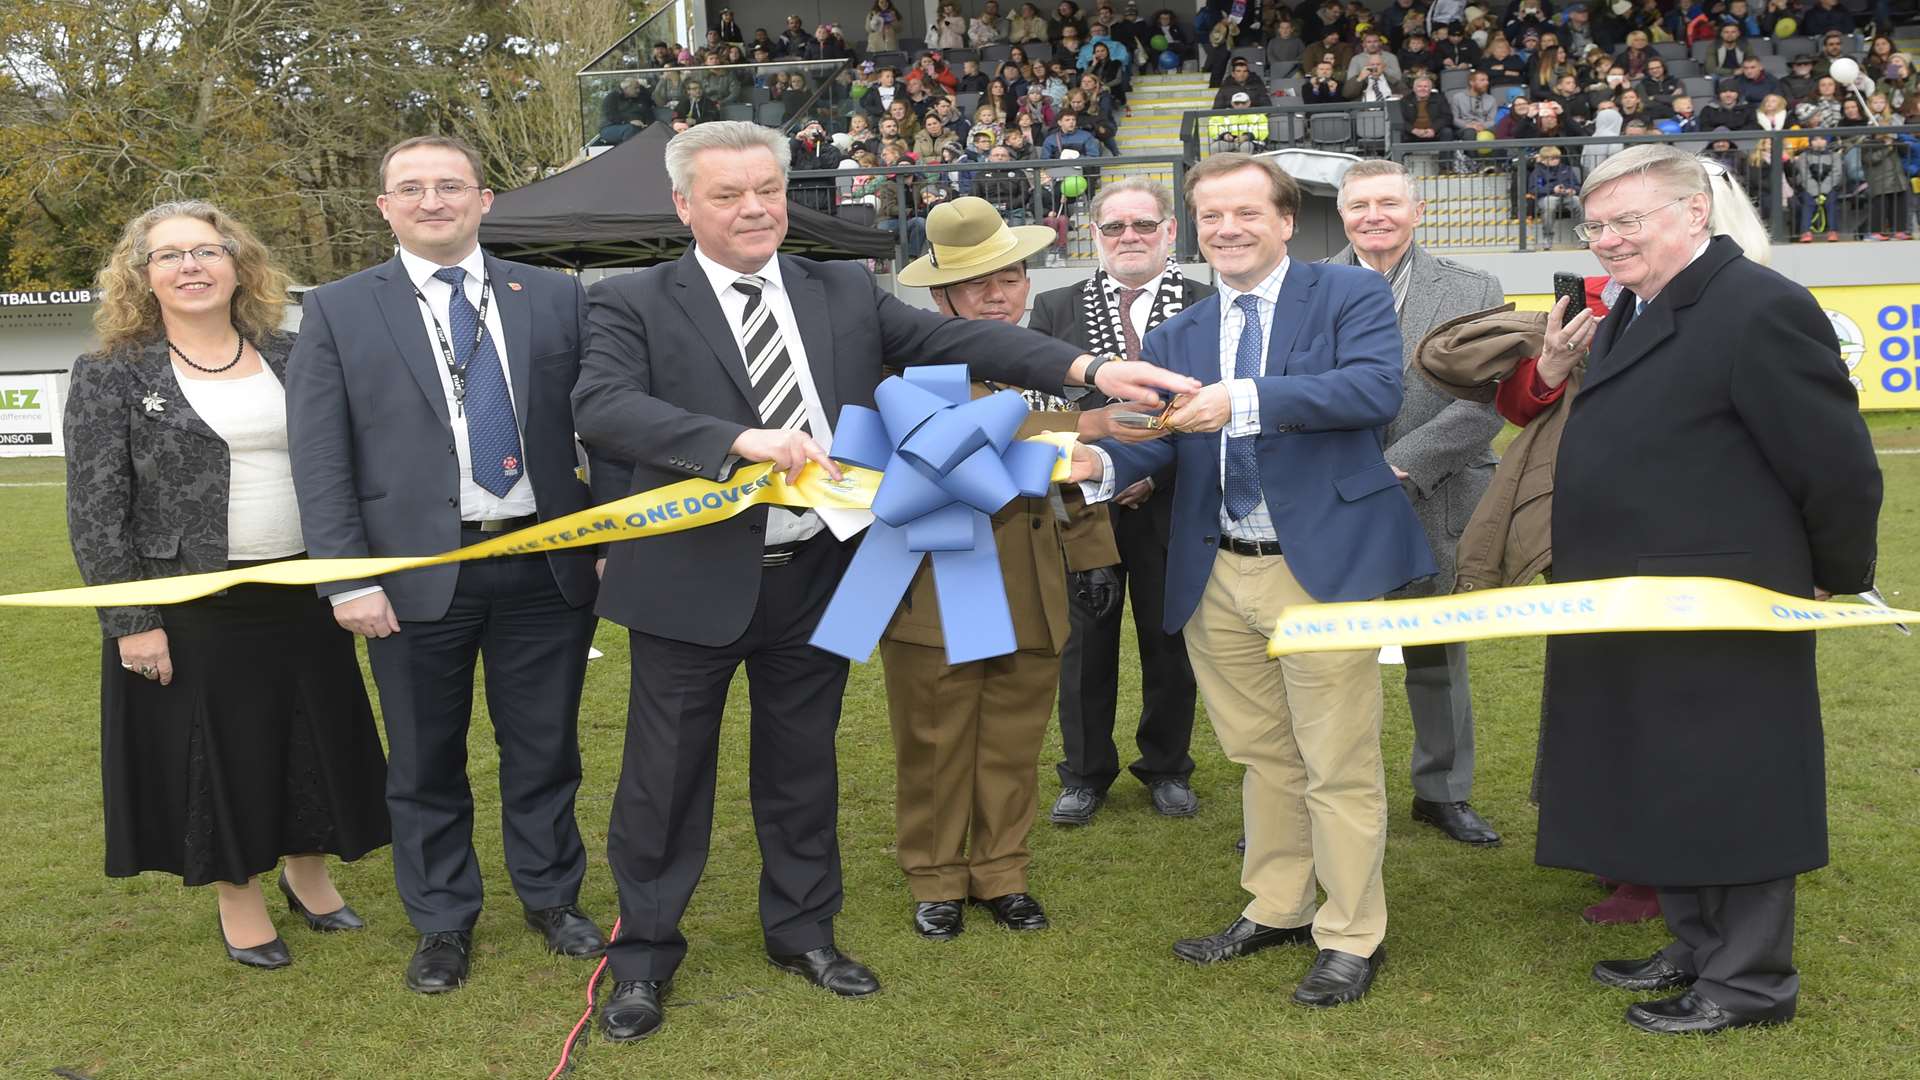 Dover Athletic chairman Jim Parmenter and Dover MP Charlie Elphicke cut the ribbon to mark the opening of the new stand at Crabble Picture: Tony Flashman